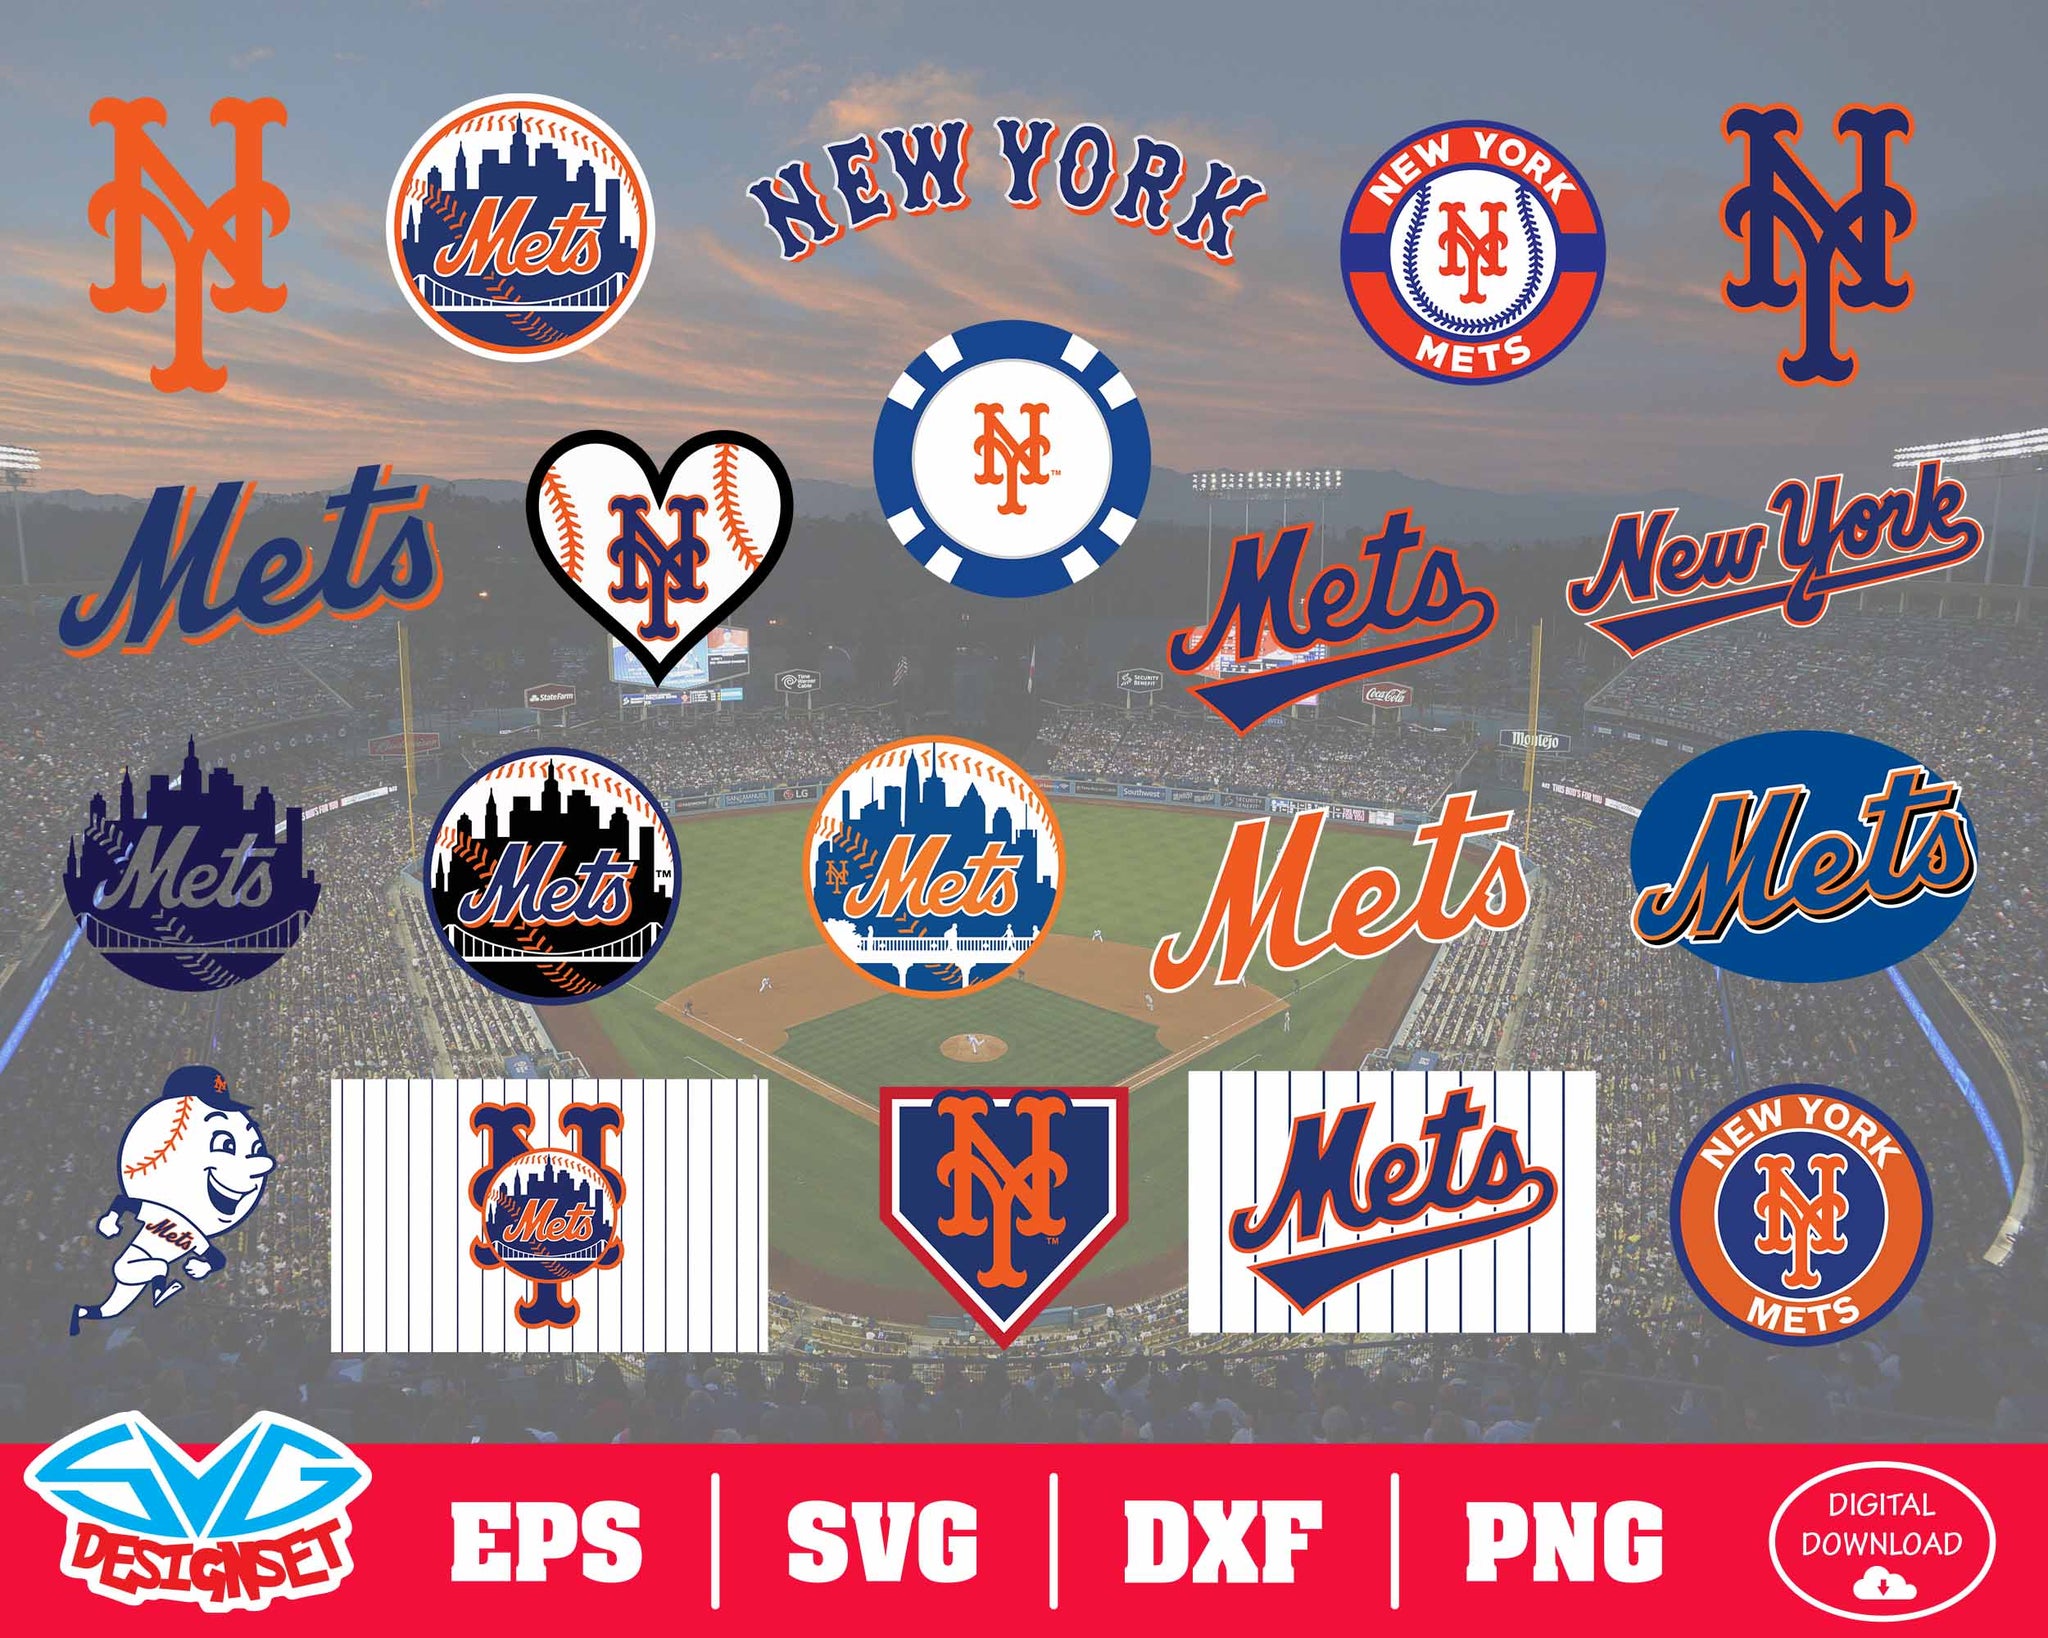 New York Mets Team Svg, Dxf, Eps, Png, Clipart, Silhouette and Cutfiles - SVGDesignSets